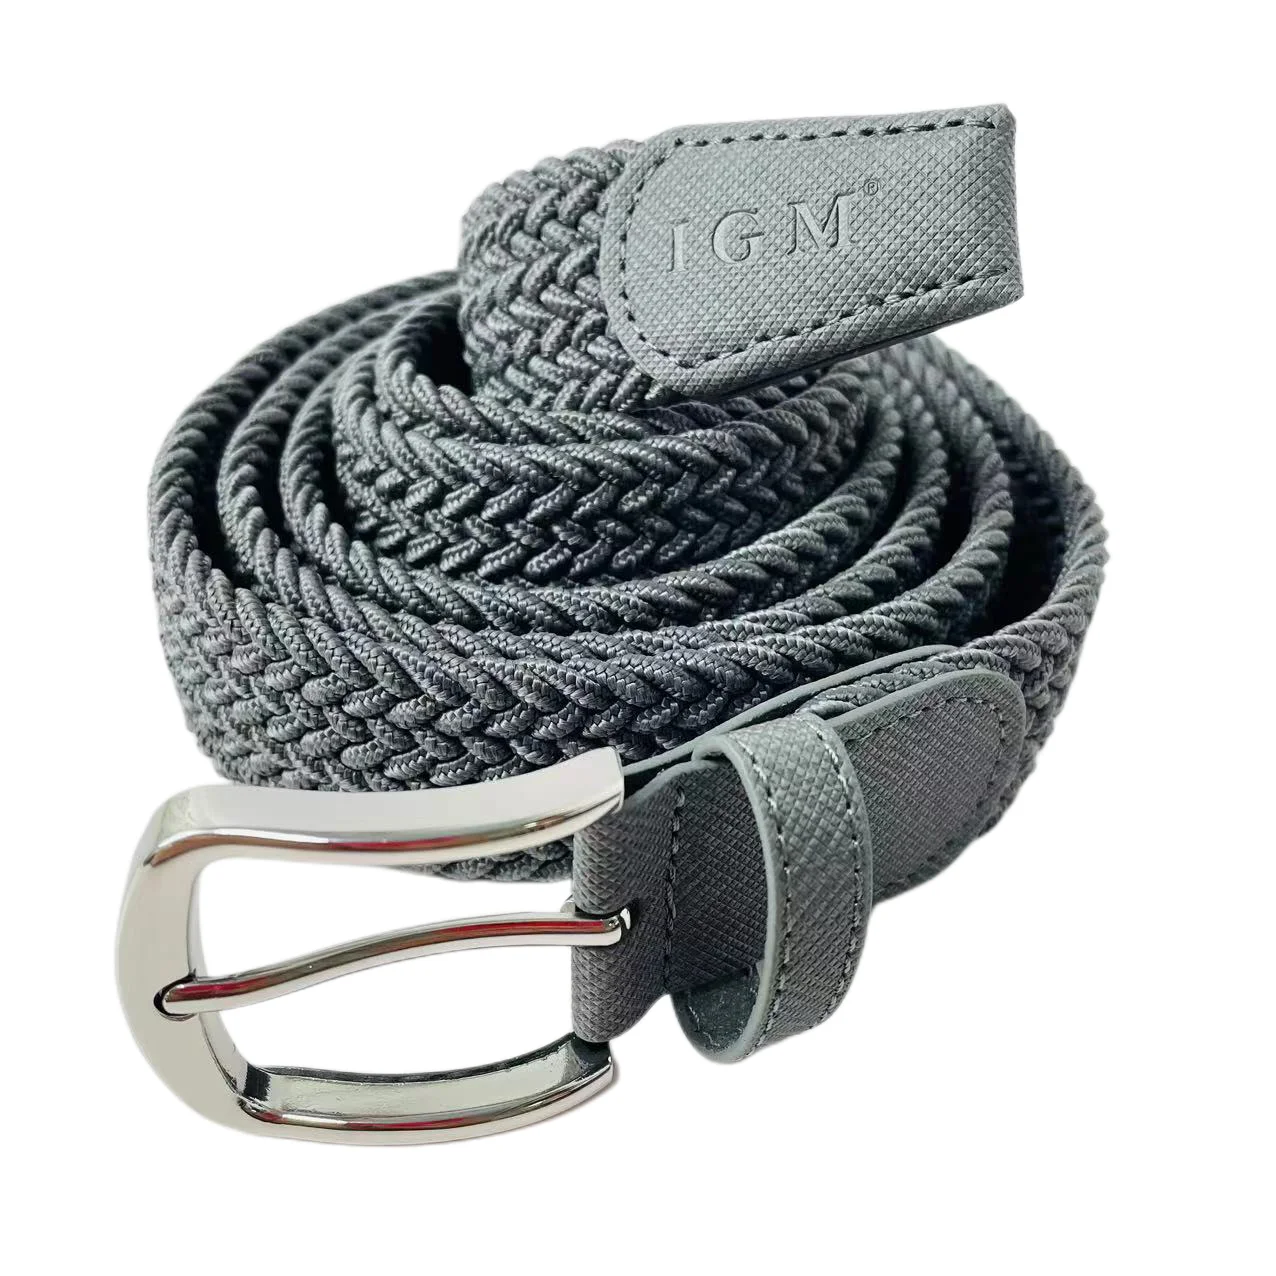 140-180CM Length Size Adjustable Men's Elastic Leather Belt with Ratchet Auotomatical Comfort Click System for Fat Person